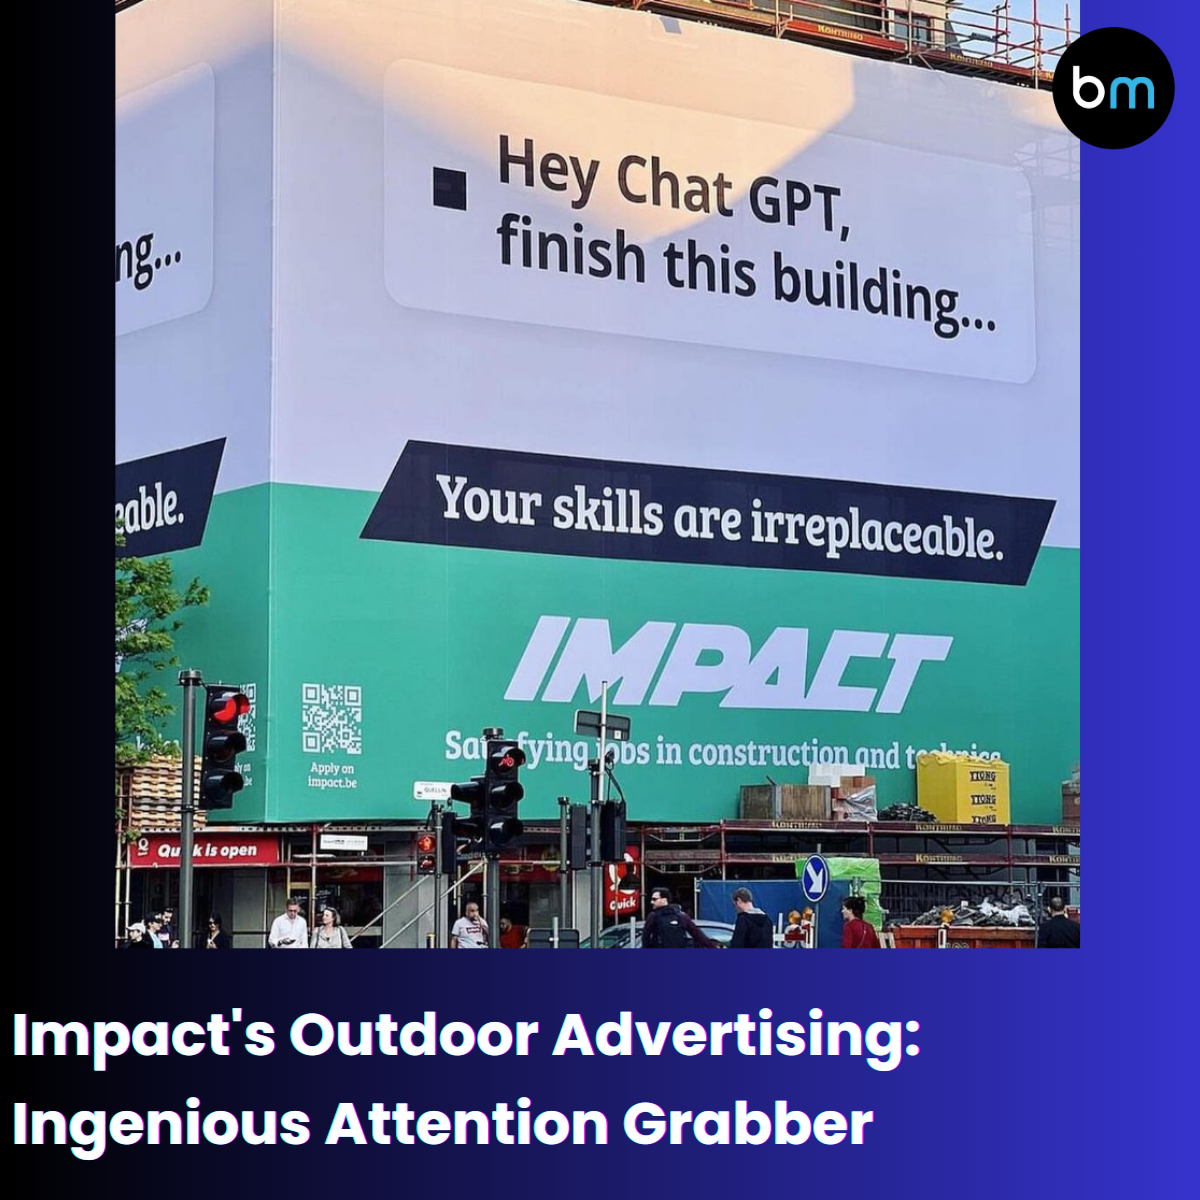 Outdoor advertising has significantly evolved in recent years, and Impact has proven to be a leader in this field. Utilizing billboards, advertising signs, and other forms of OOH (Out of Home) advertising, Impact has skillfully captured public attention in a clever and effective manner.